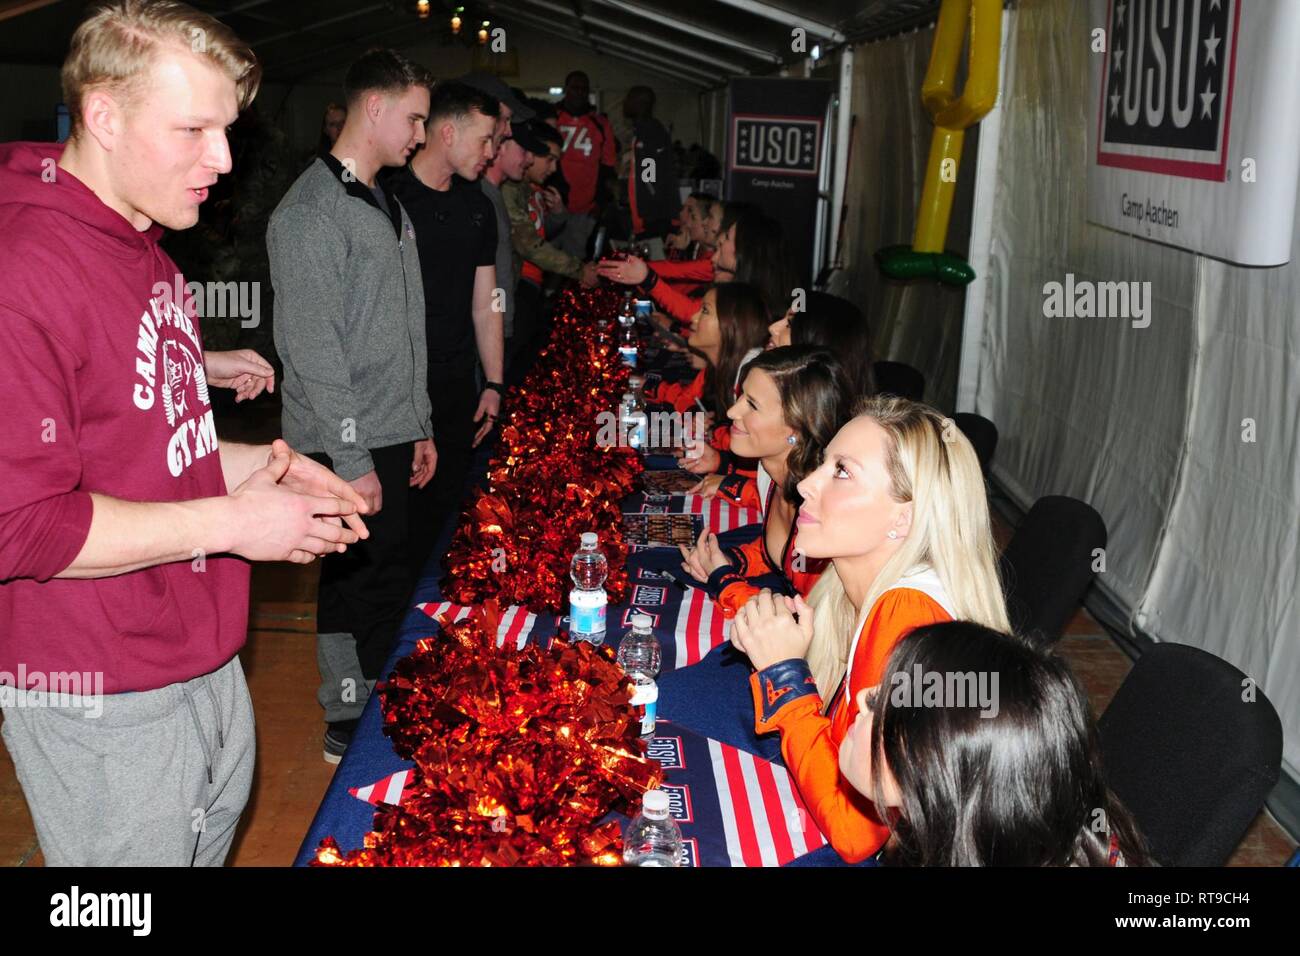 U.S. Army Spc. Jordan Vishneski, far left, assigned to 91st Brigade Engineer Battalion, 1st Armored Brigade Combat Team, 1st Cavalry Division chats with cheerleaders as part of a USO meet and greet with the Denver Broncos cheerleaders, mascot and Alumni football players at Camp Aachen's USO annex in Grafenwoehr, Germany, Jan. 26, 2019.   IRONHORSE deployed in support of Atlantic Resolve, an enduring exercise to improve interoperability between U.S. Forces, their NATO allies and partners. Stock Photo